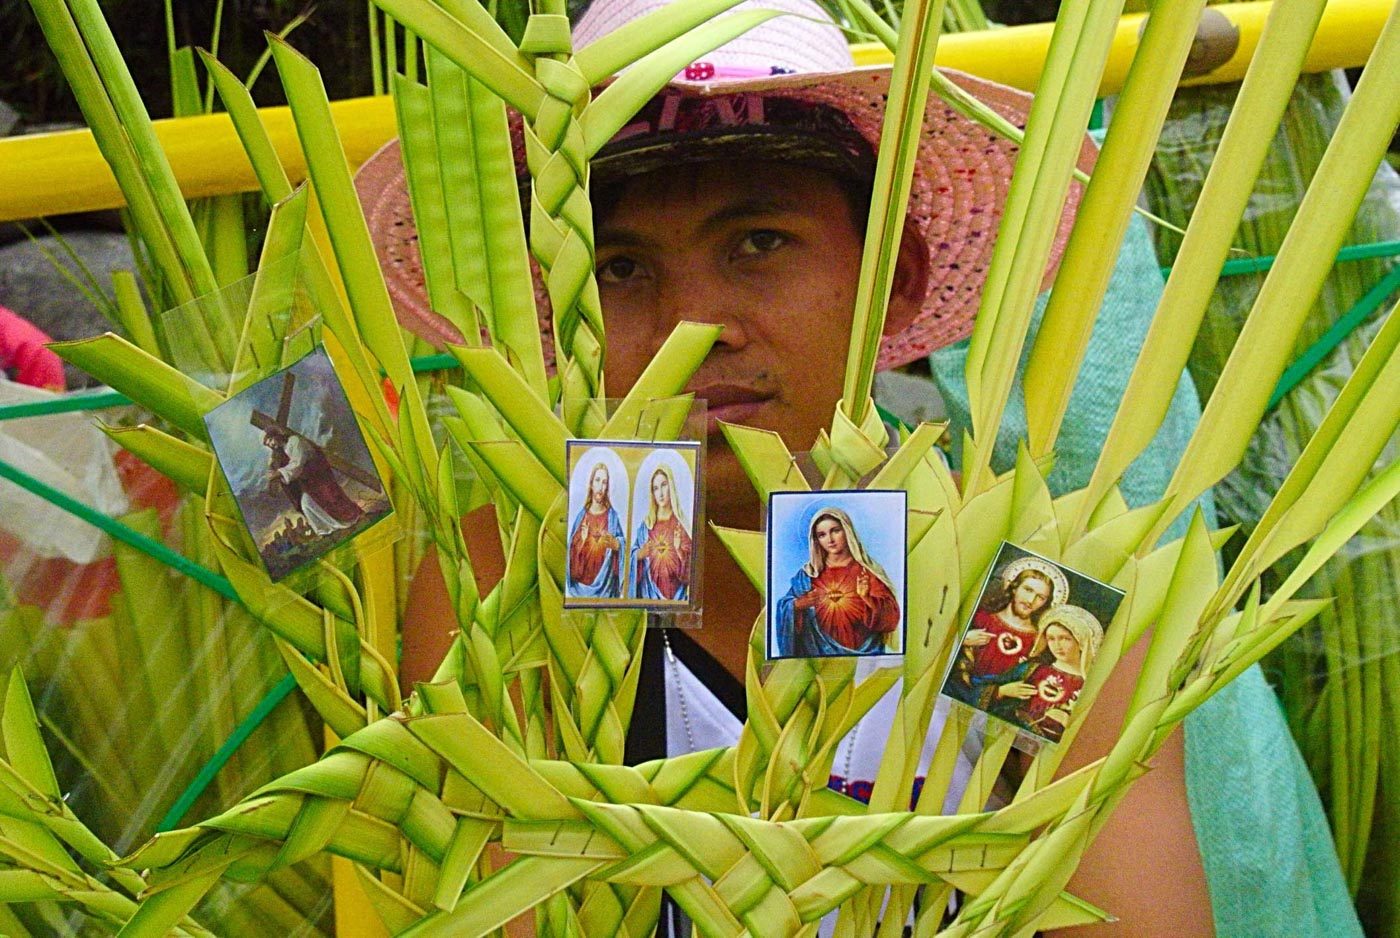 IN PHOTOS: Palaspas makers prepare for Palm Sunday